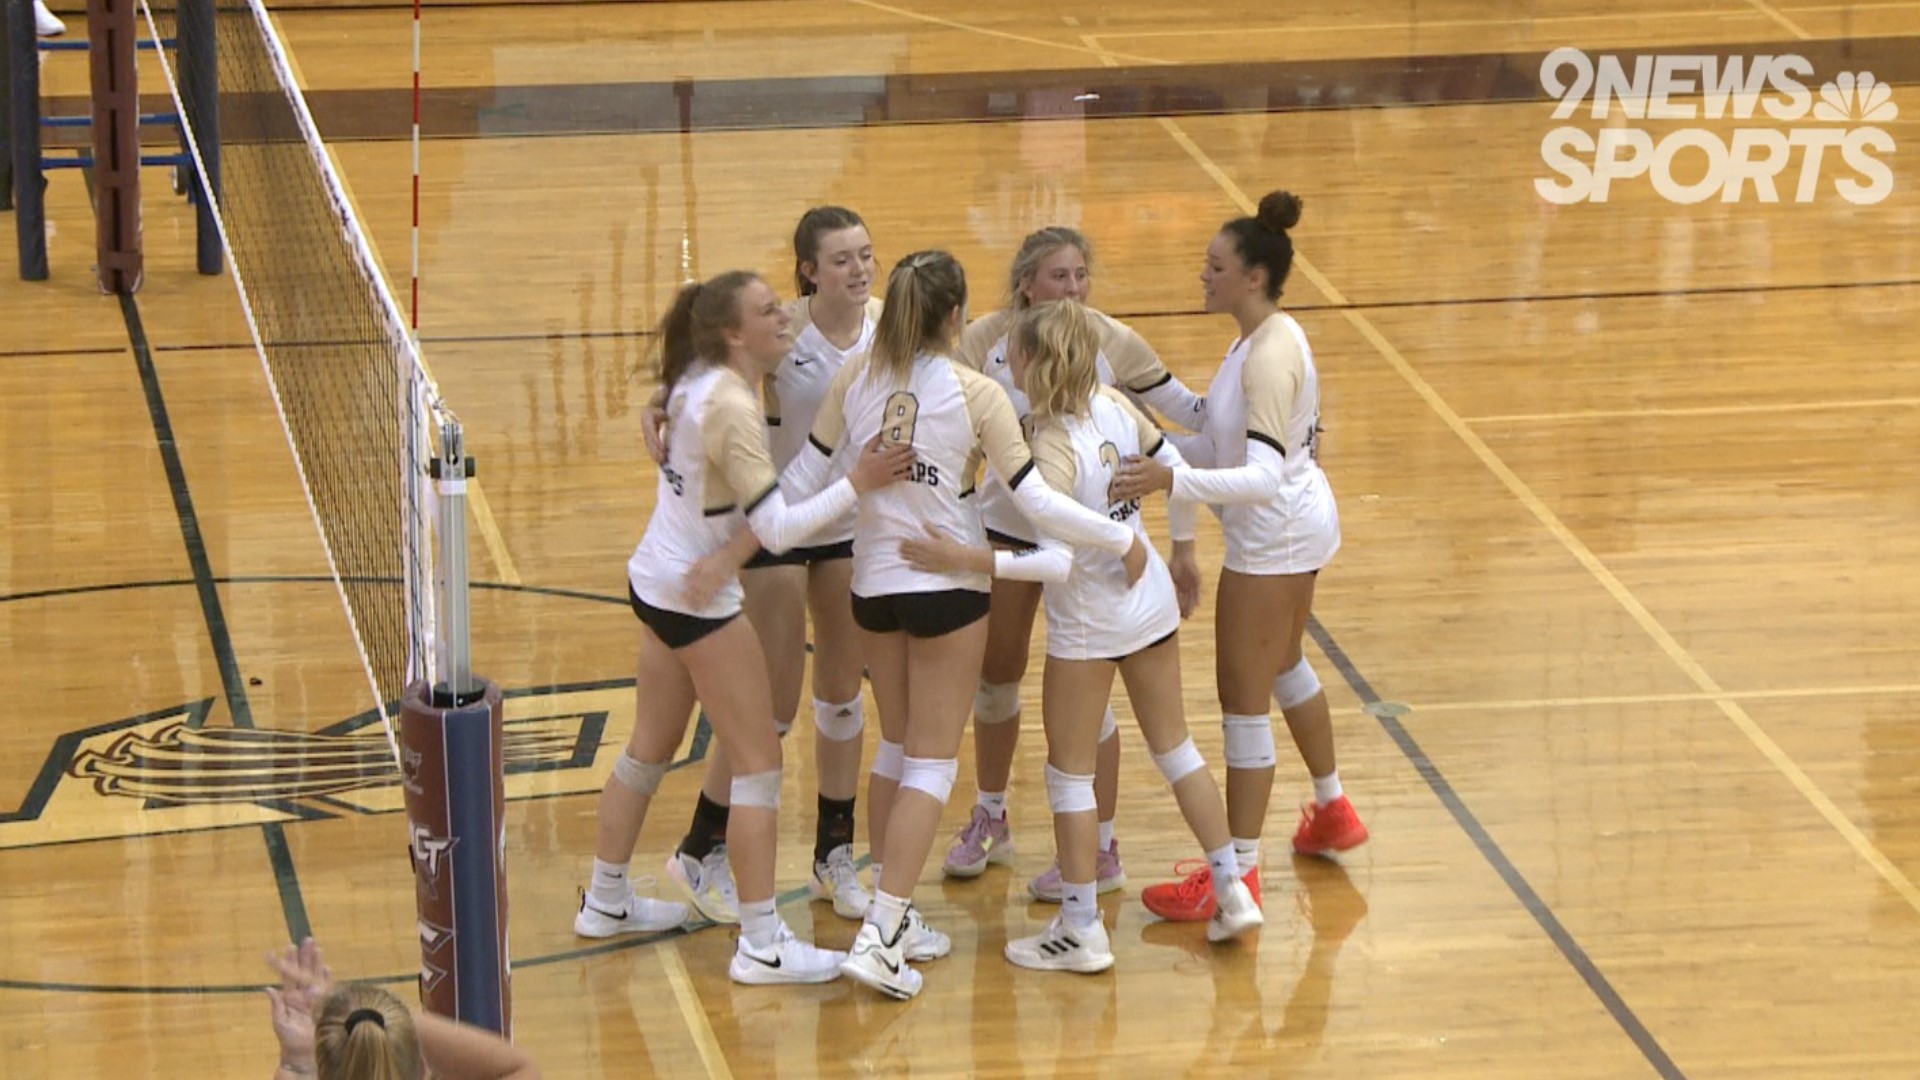 The Jaguars handled the Cougars in three sets (25-15, 25-16, 25-18) on the road Tuesday night.